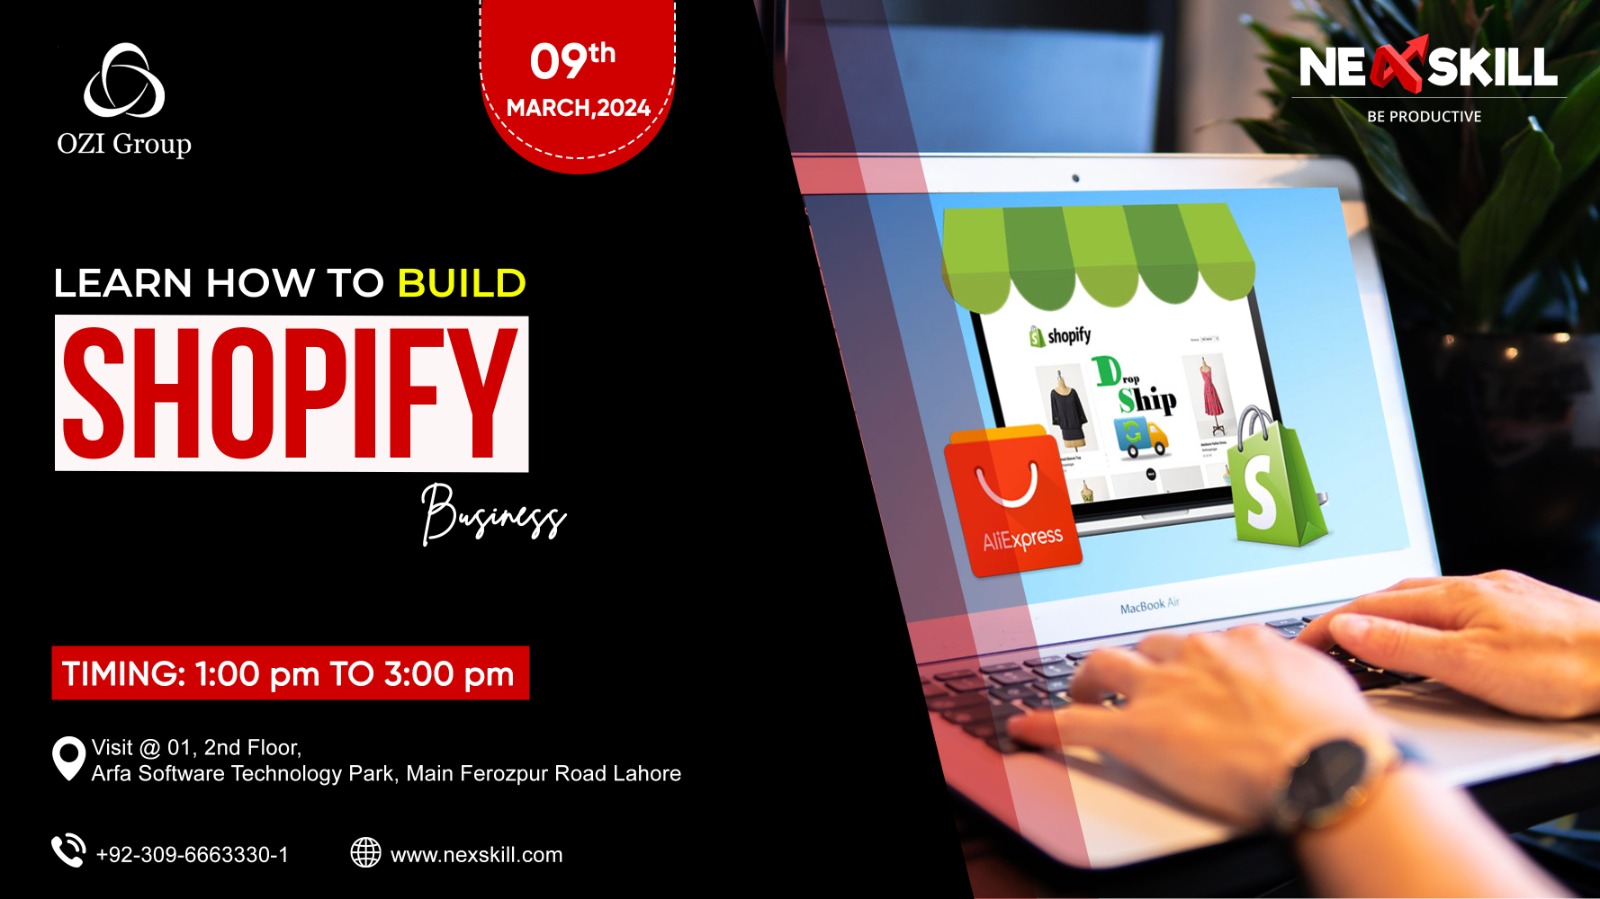 Learn How to Build Shopify Business